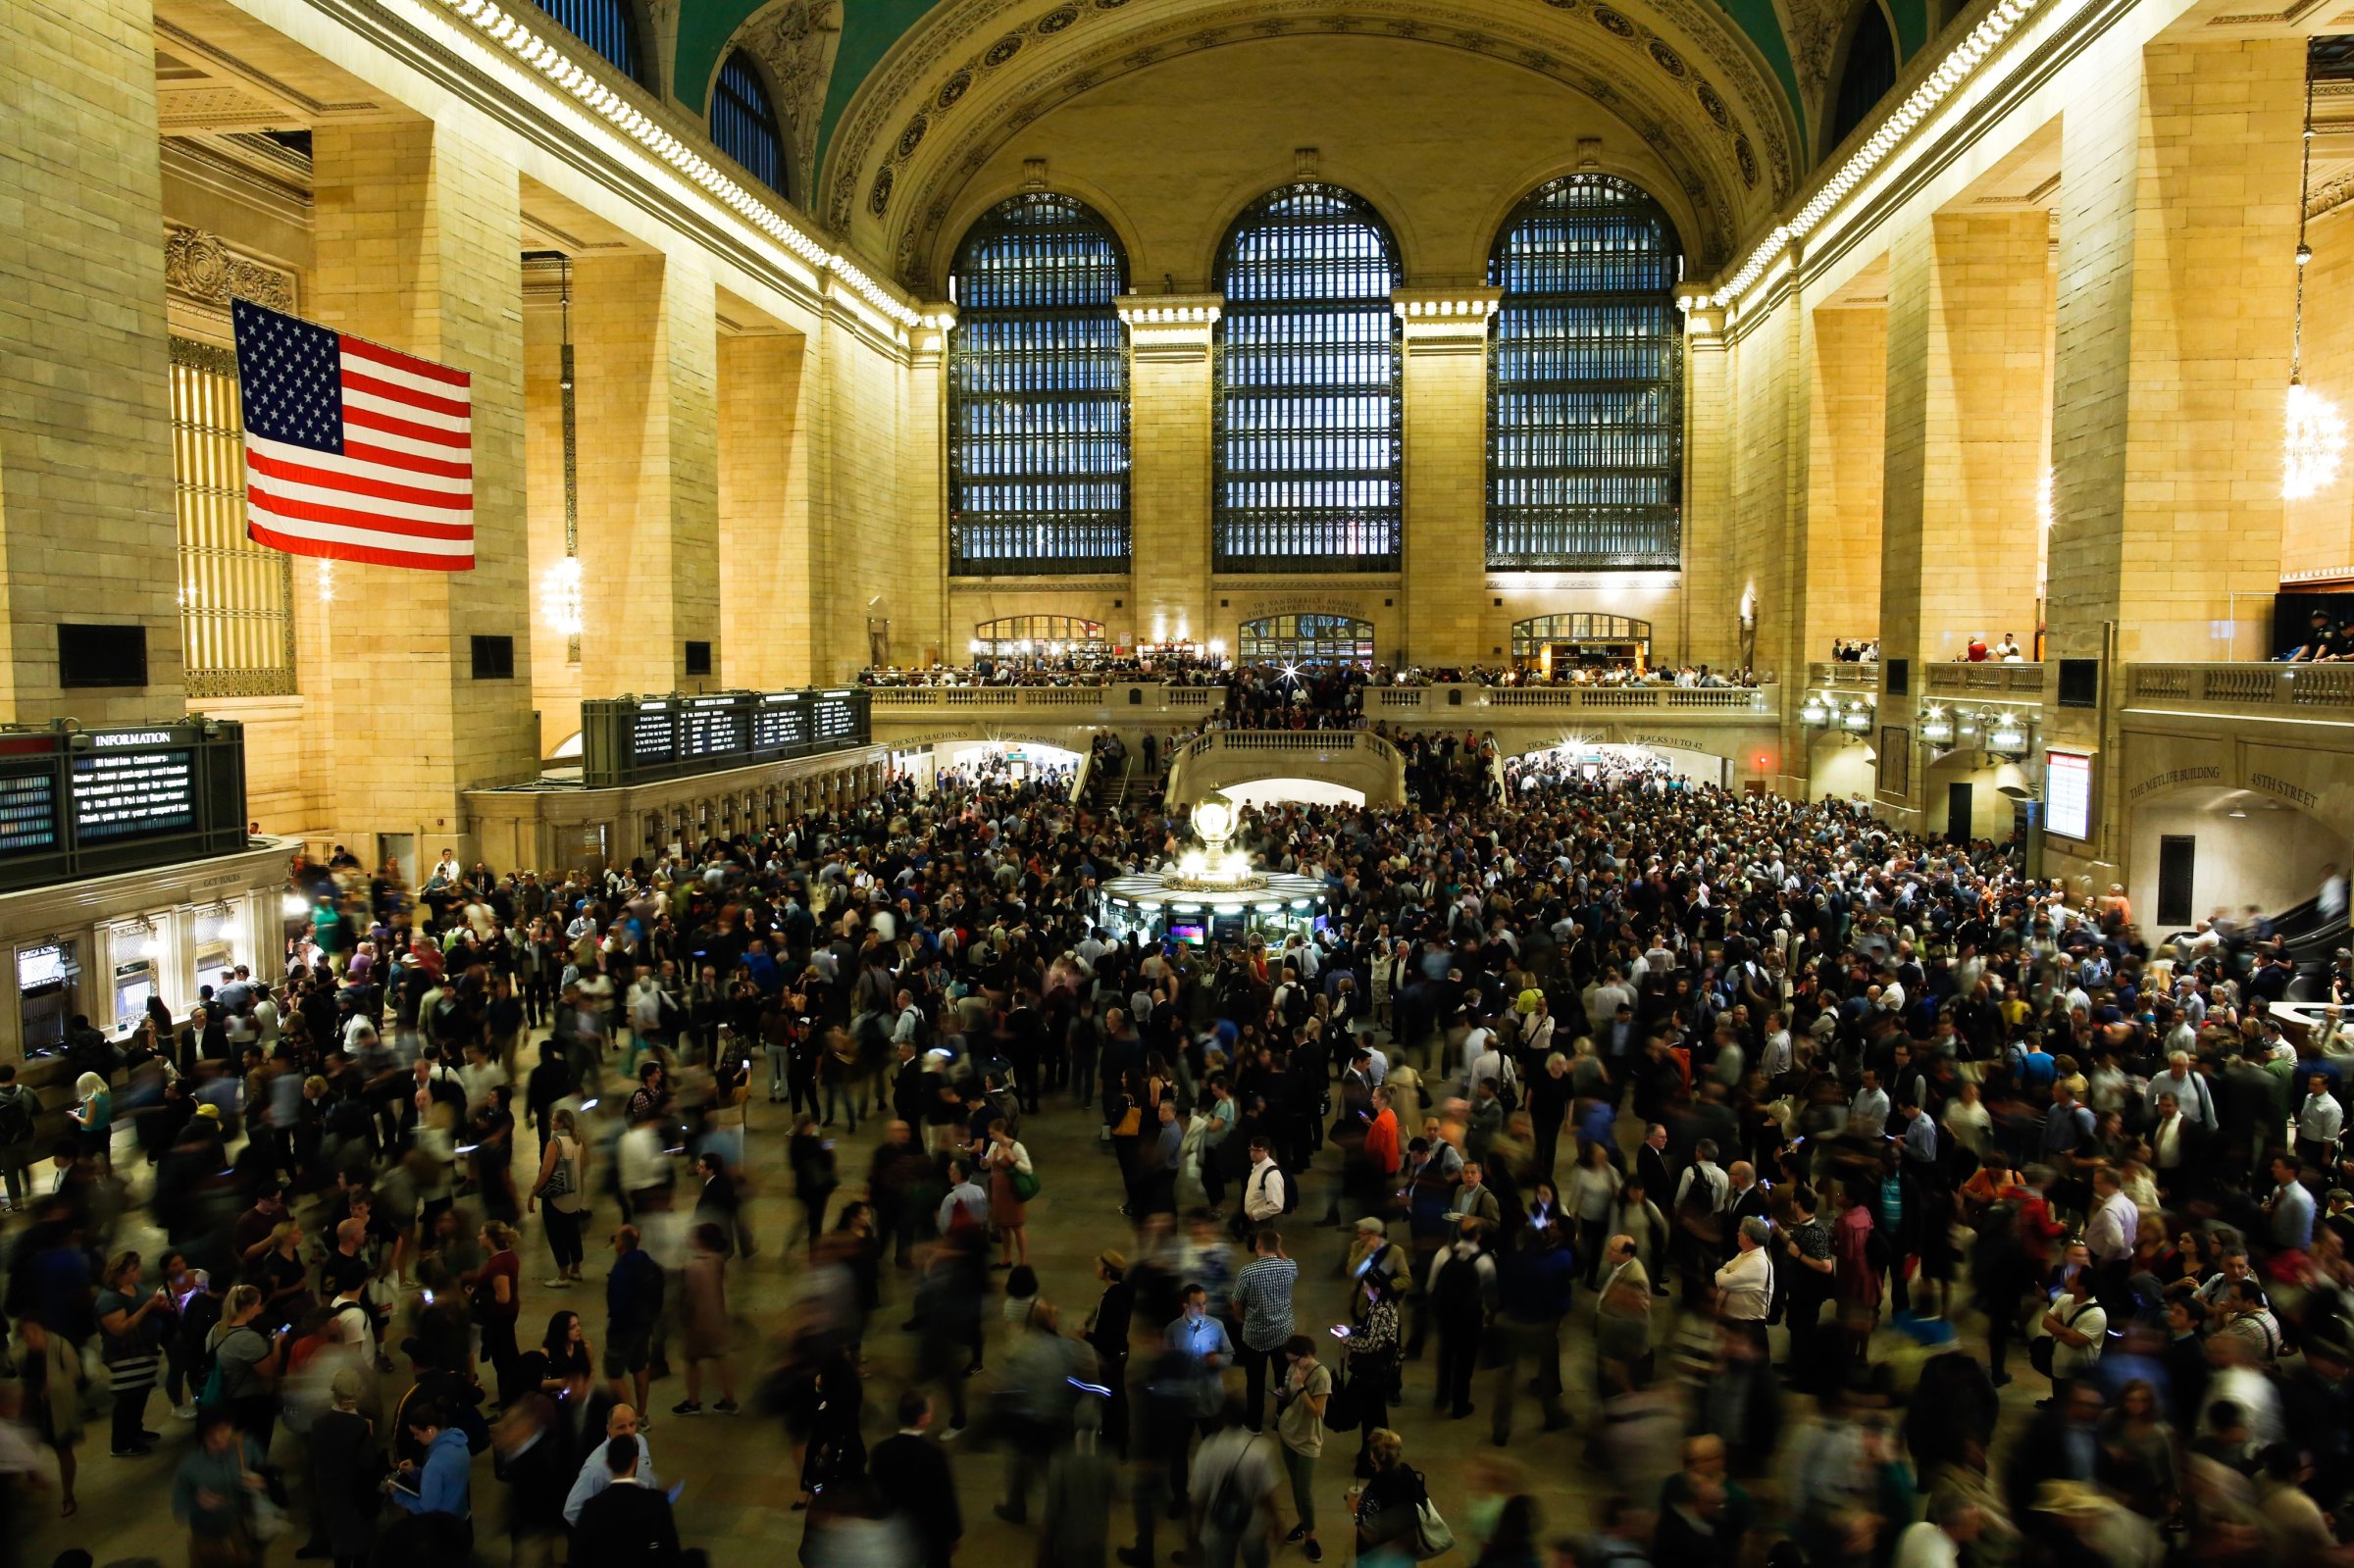 Severe Thunderstorm Snarls Evening Commute At New York's Grand Central, As Many Trains Suspended